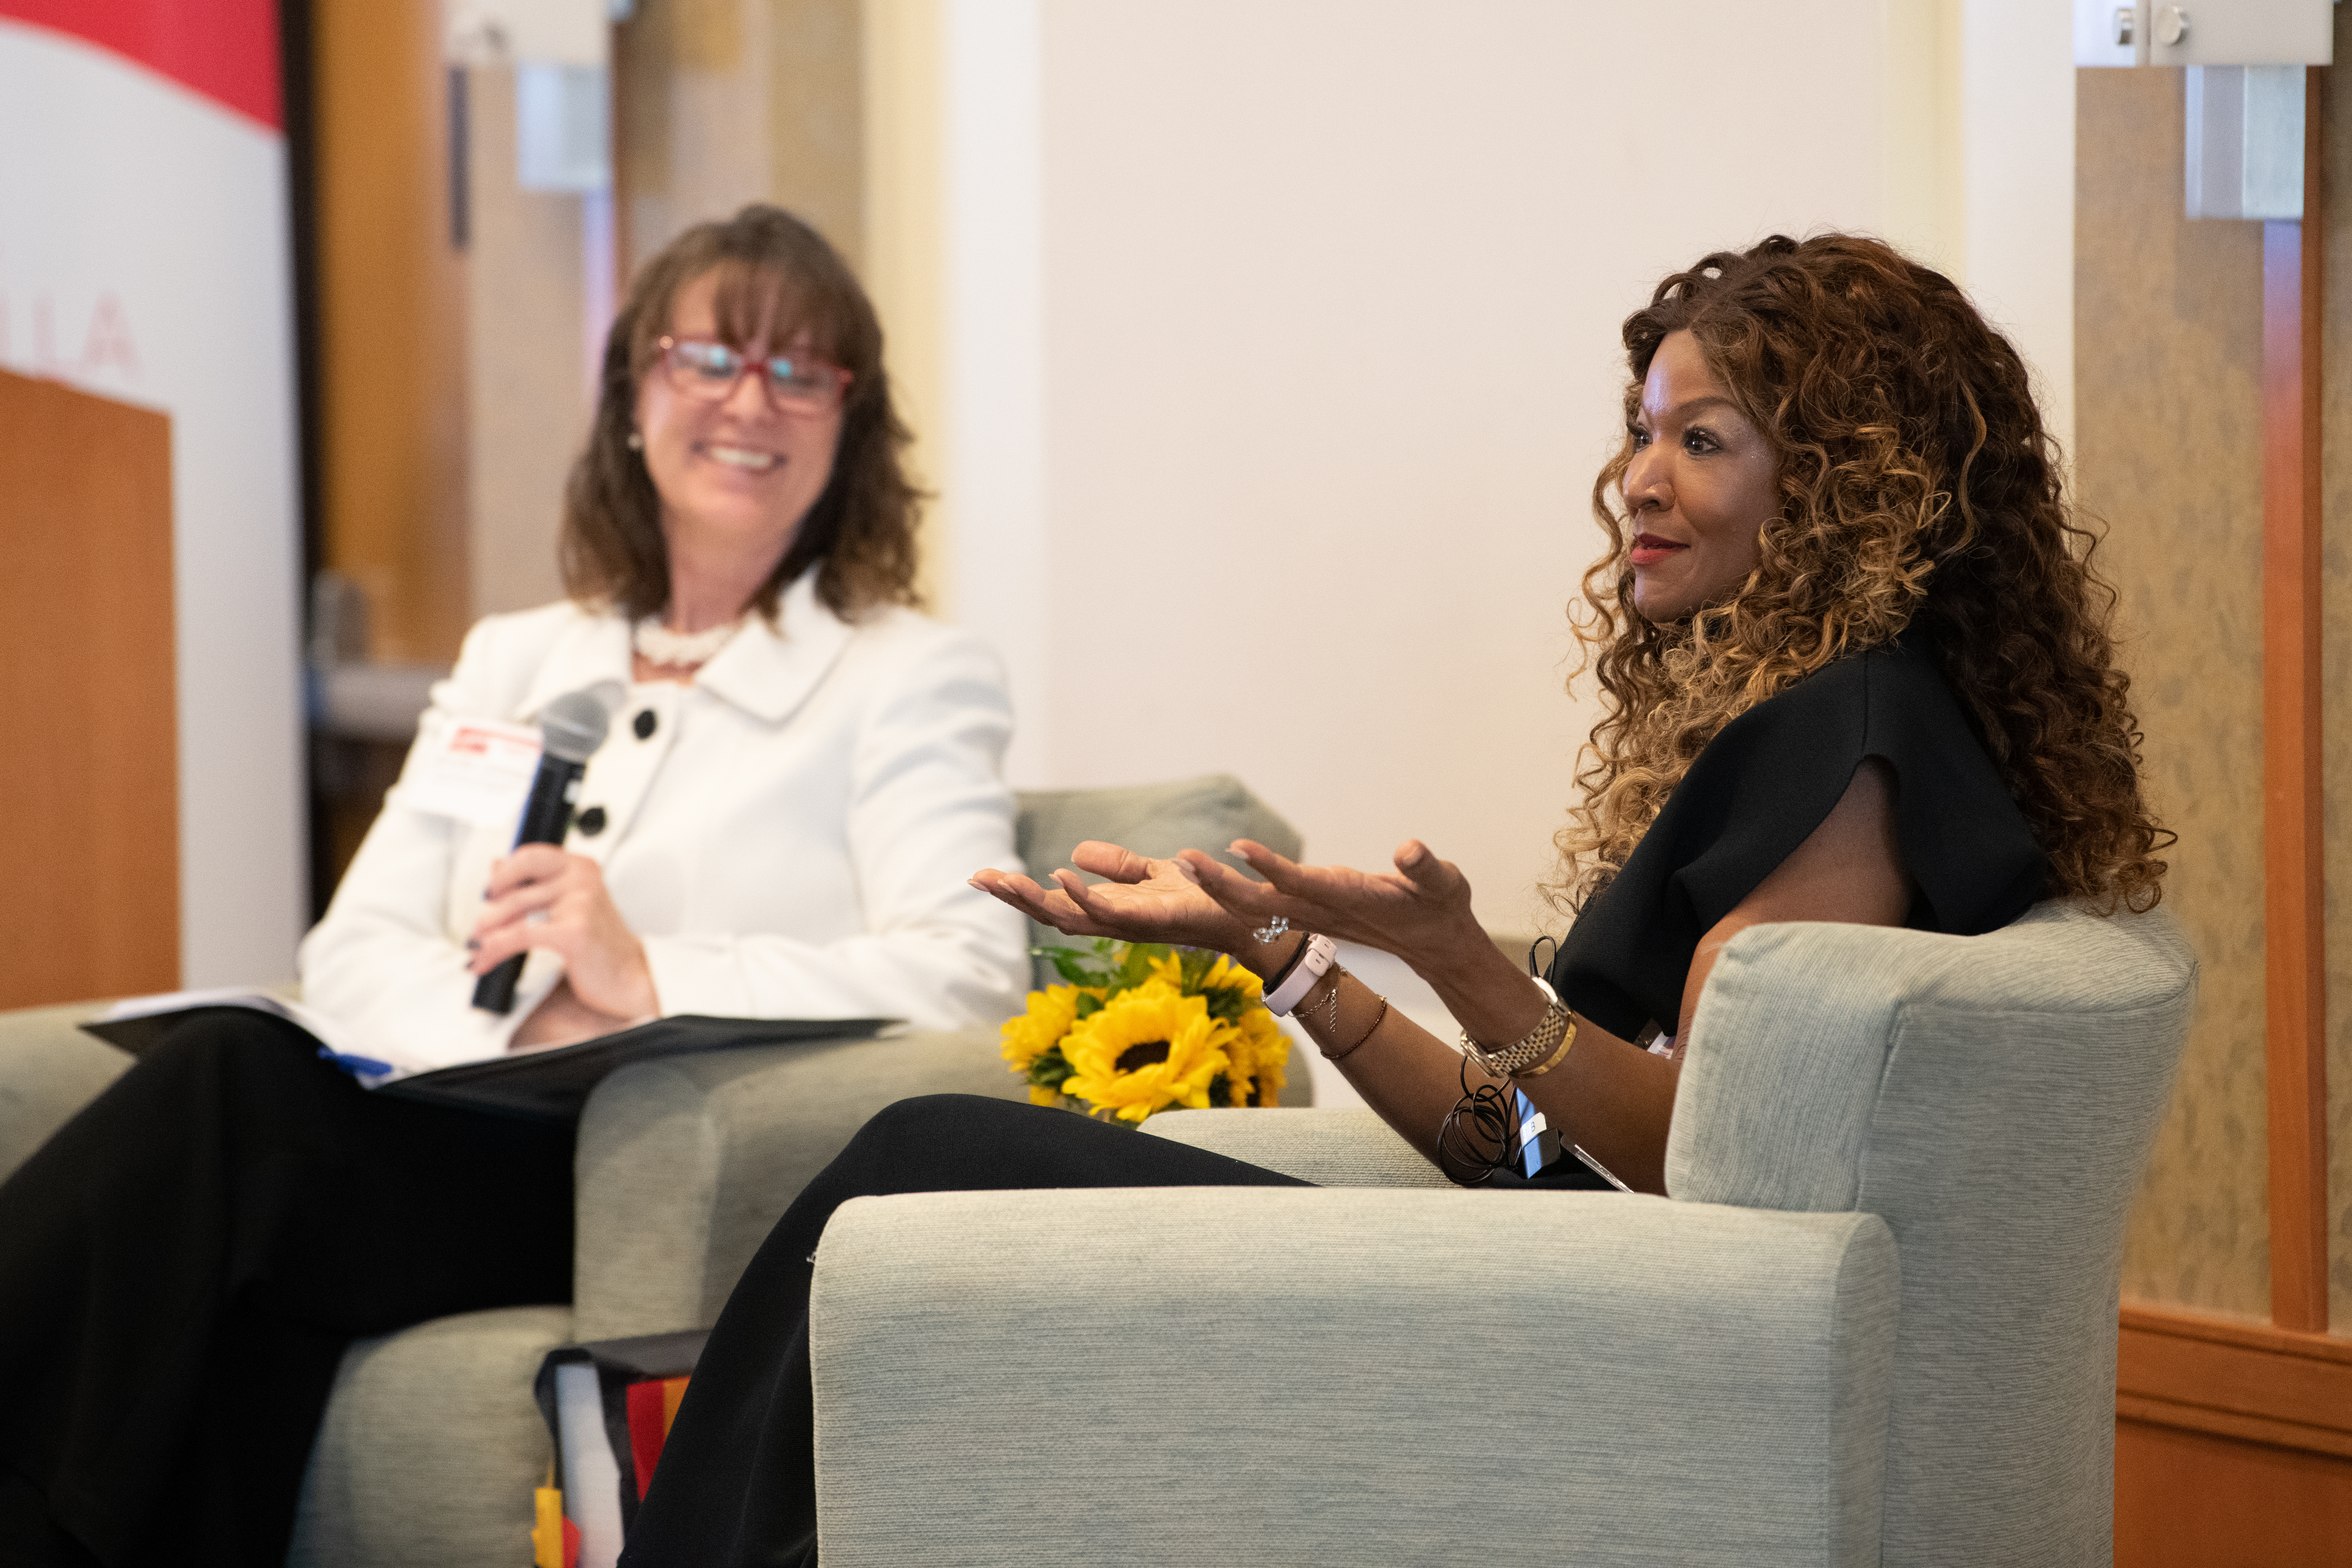 Photo of UMBrella founder and chair Jennifer Litchman sitting on a stage and interviewing UMB alum Tamika Tremaglio